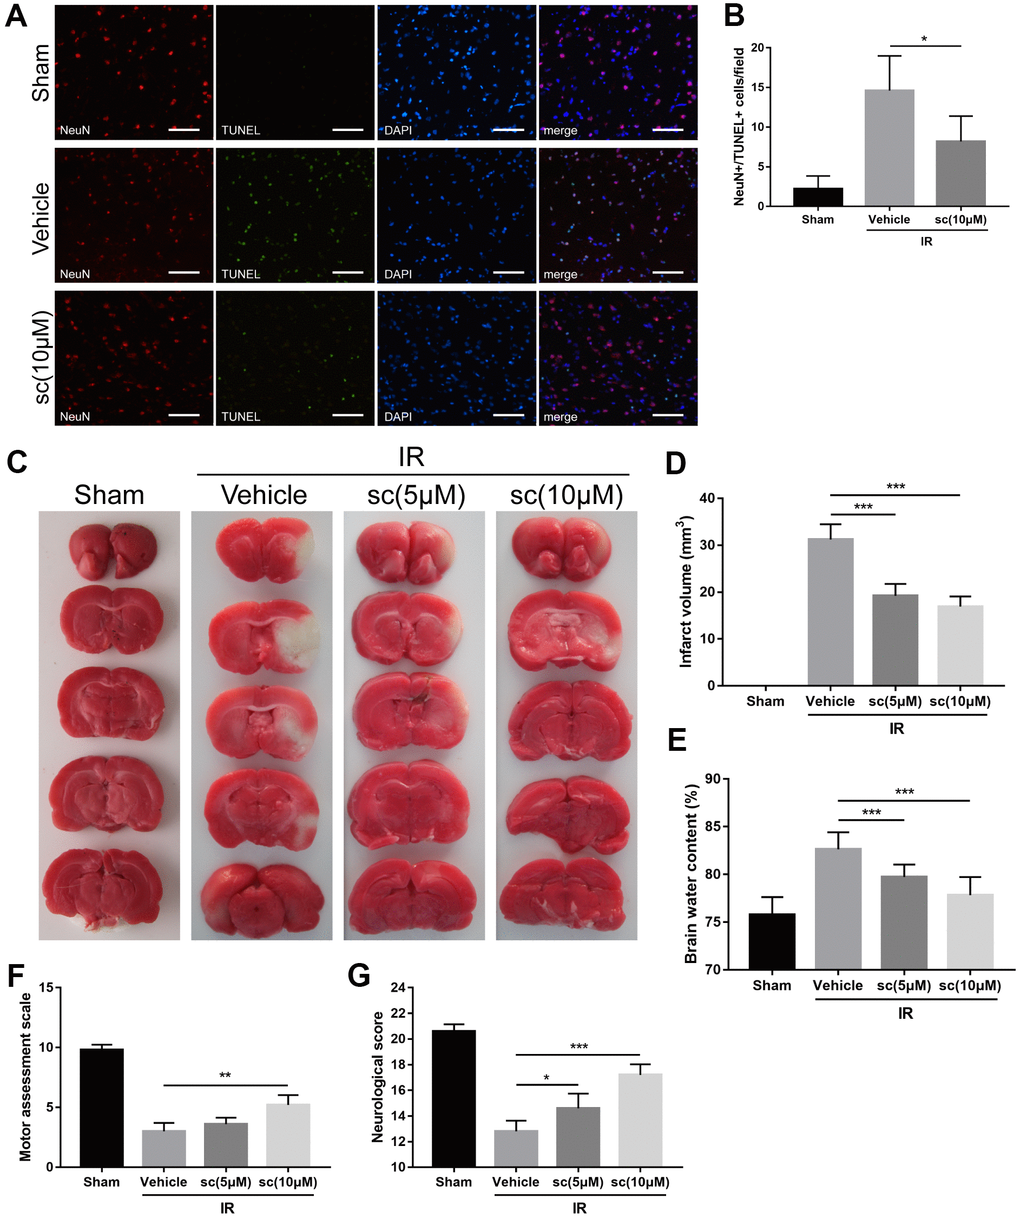 PTP1B inhibitor treatment reduced neuronal apoptosis, cerebral infarct volume, brain water content, and improved neurologic function after ischemia/reperfusion (IR) injury. (A) Immunofluorescence/TUNEL assays were performed to detect neuronal apoptosis in rat ipsilateral cerebral cortex 24 h after IR injury. Scale bar = 50 μm. (B) The density of NeuN+/TUNEL+ cells was quantified as the mean ± SEM (n = 6 per group). (C) TTC staining were performed to determine infarct volume 24 h after cerebral IR injury. Infarct area was defined as the white area. (D) The infarct volume was quantified as (infarct volume/whole brain volume) × 100% (n = 5 per group). (E) Brain water content. (F) Motor assessment score 3 days after IR injury. (G) Neurologic score 3 days after IR injury. Data for d-g are presented as the mean ± SEM (n = 6 per group). *p p p 